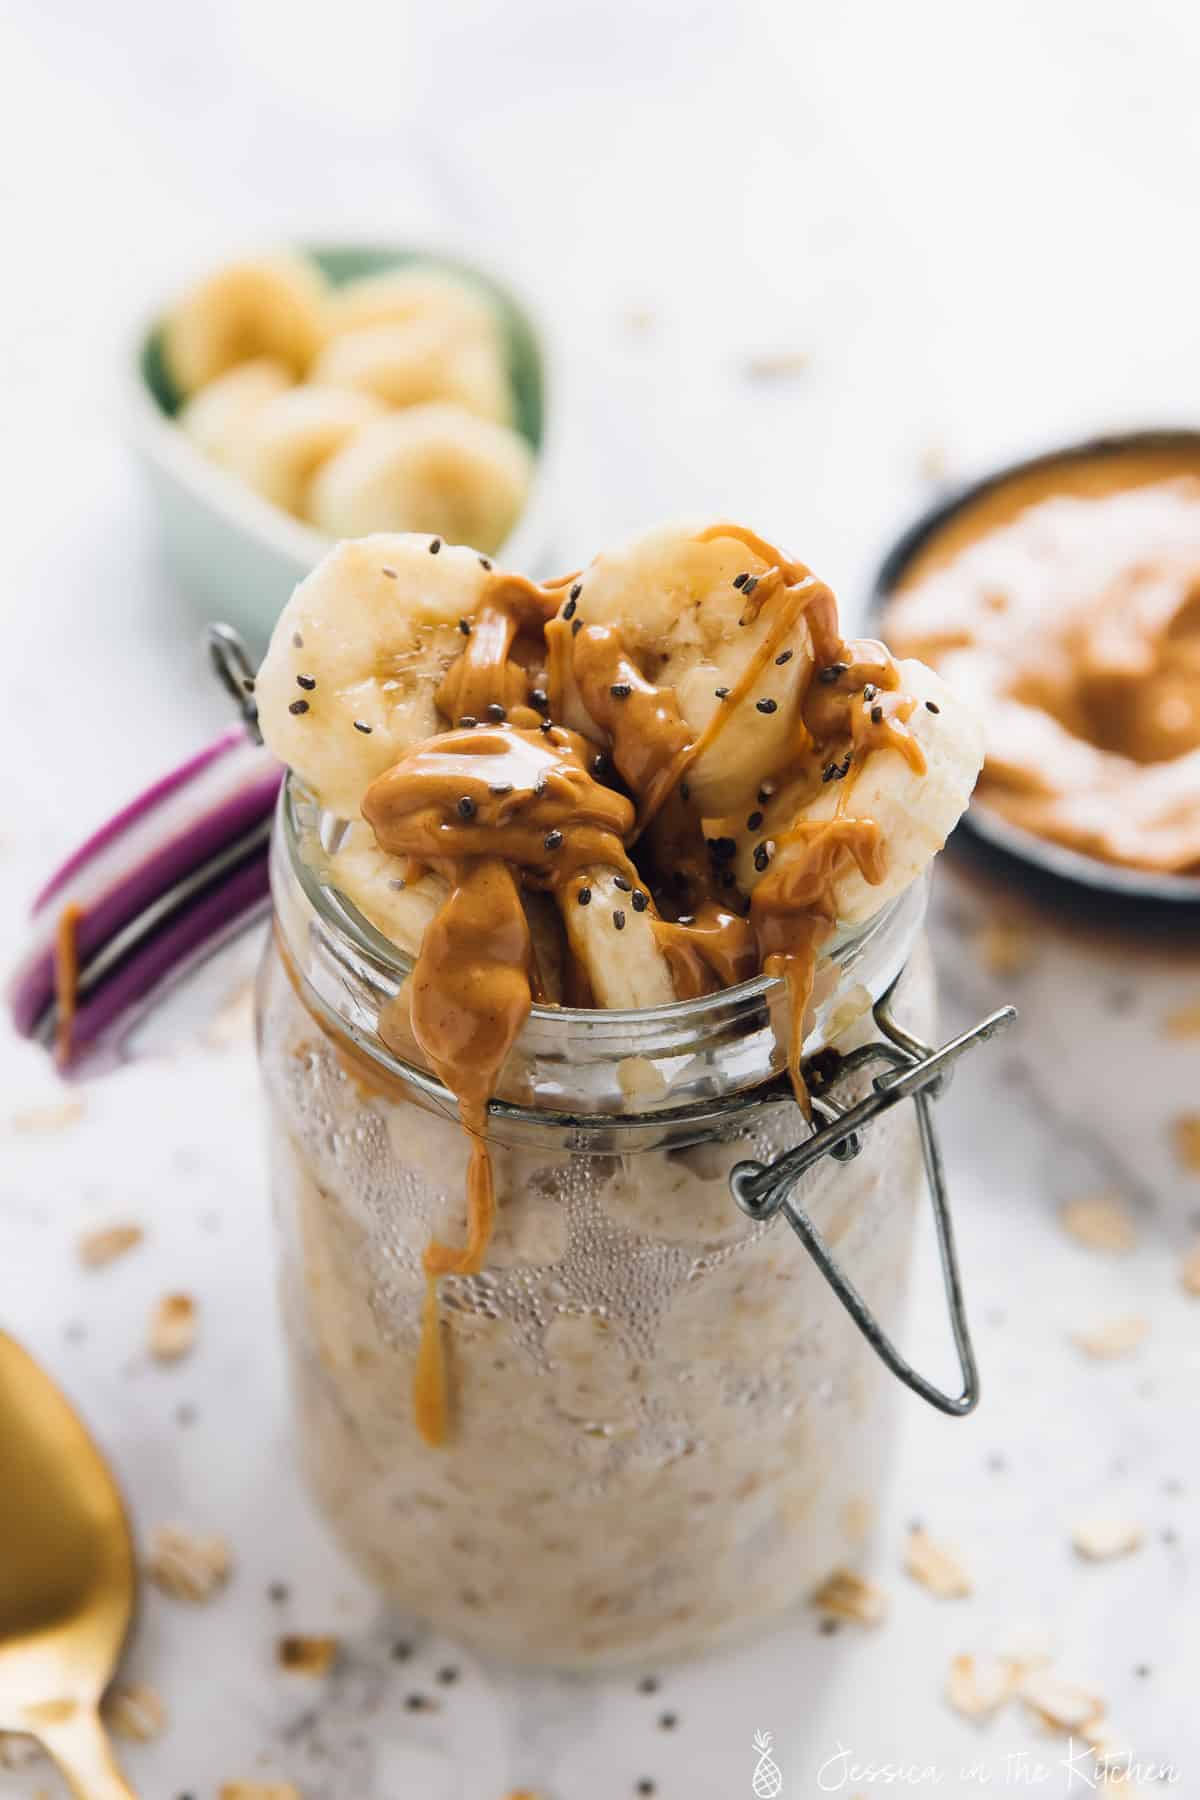 Oats in a jar with sliced bananas and peanut butter drizzled on top.